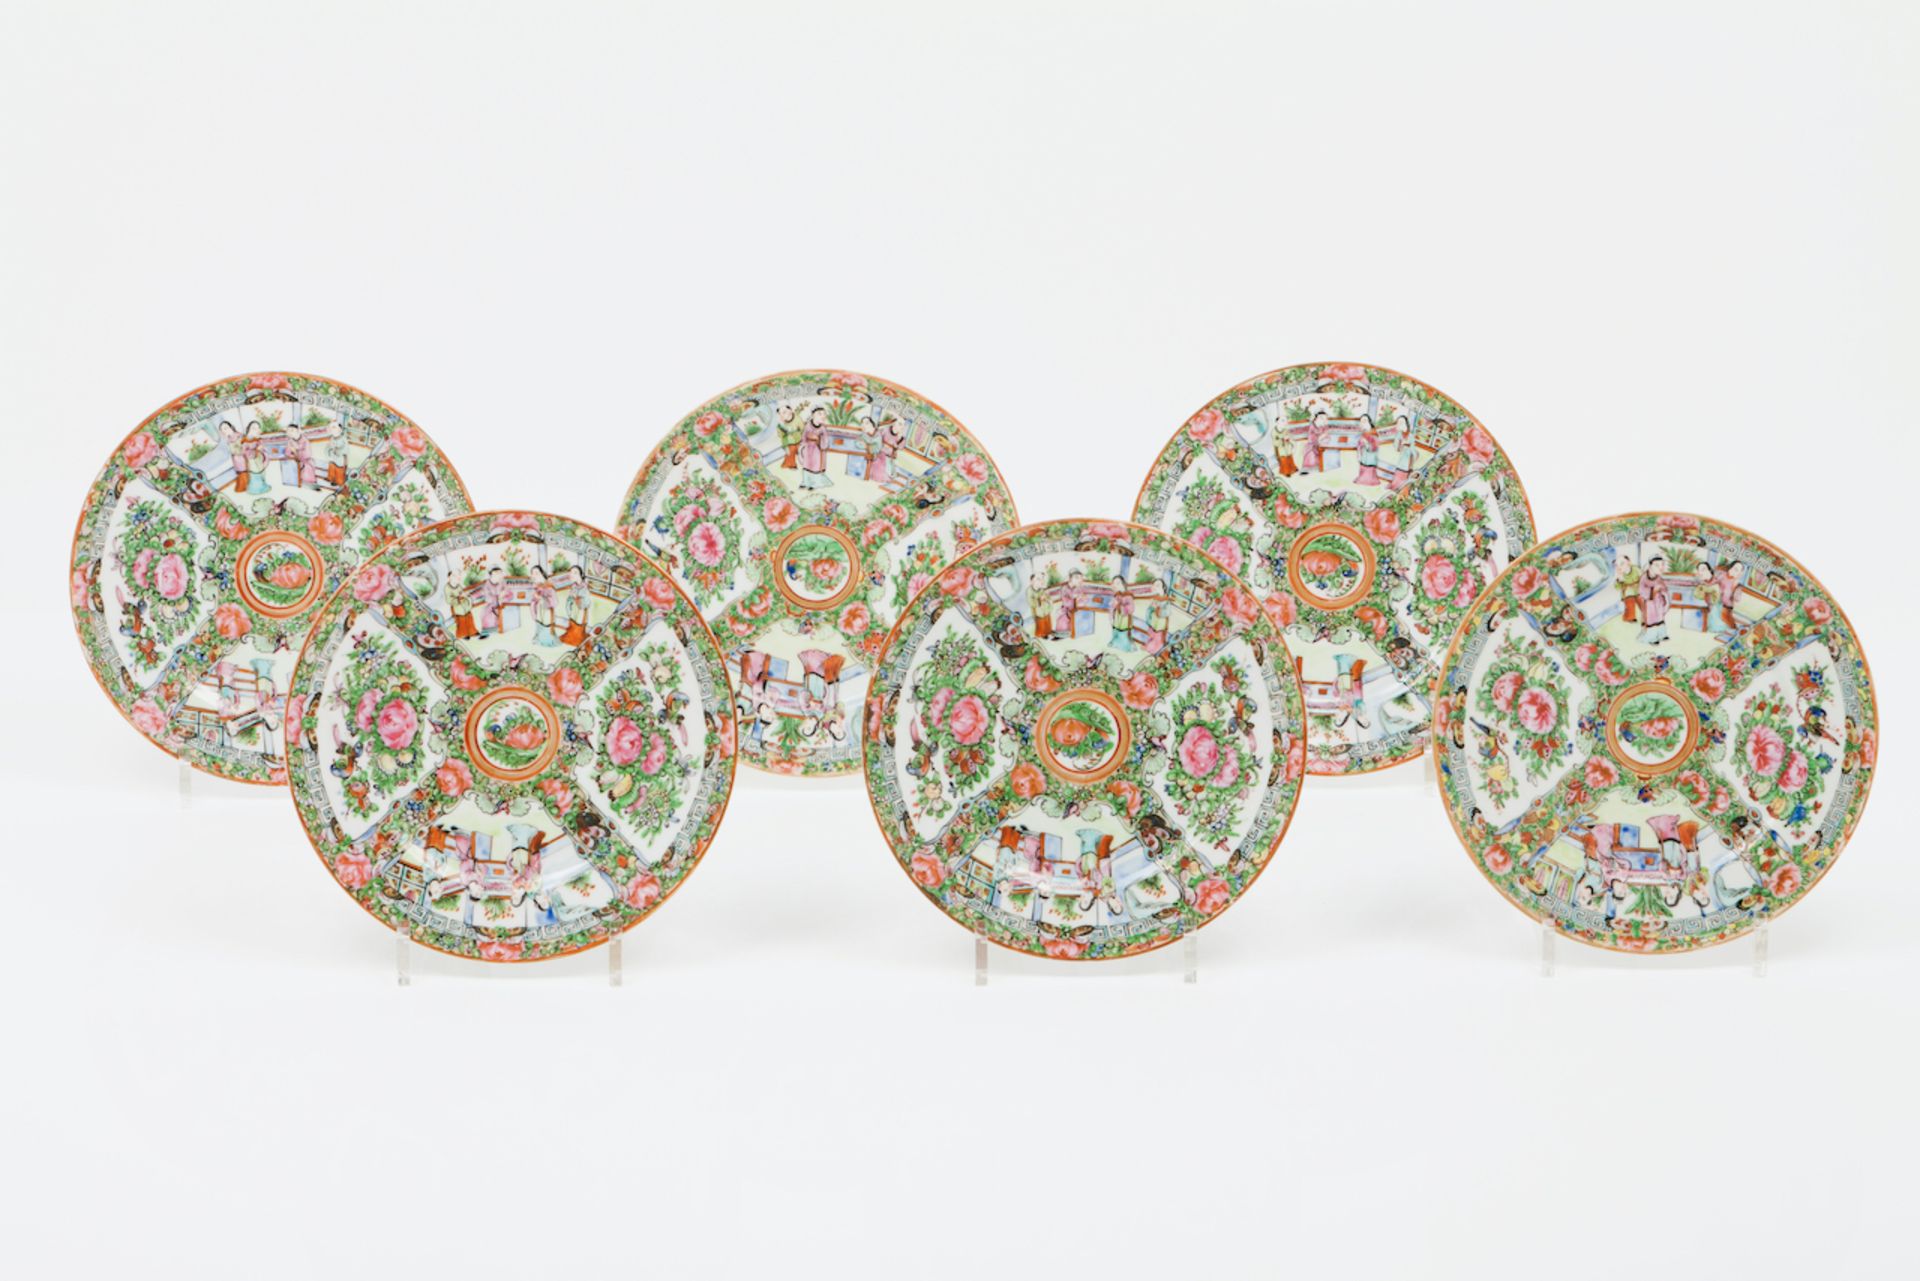 A six plate setChinese porcelainCanton decoration of flowers, oriental figures and birdsQing